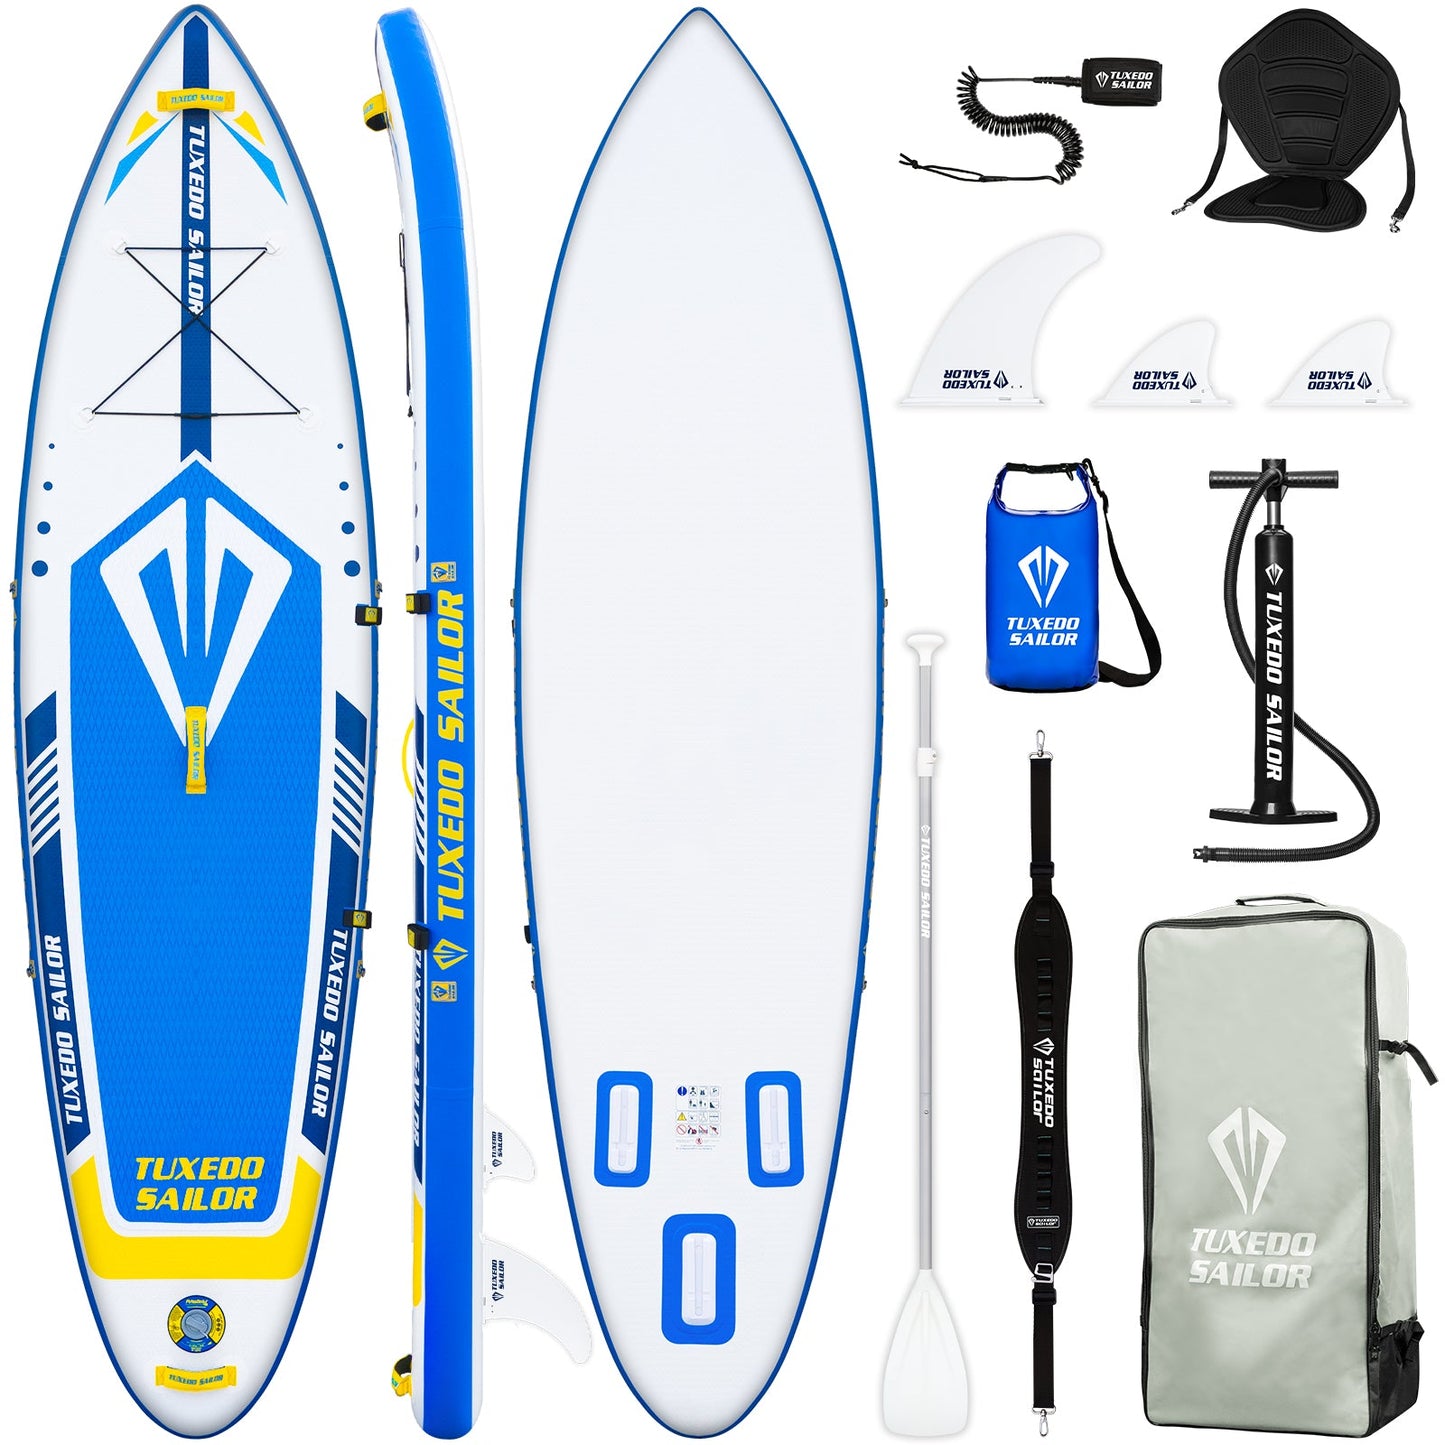 funwater touring inflatable stand up blue paddle board 10'6" easy to store and carry